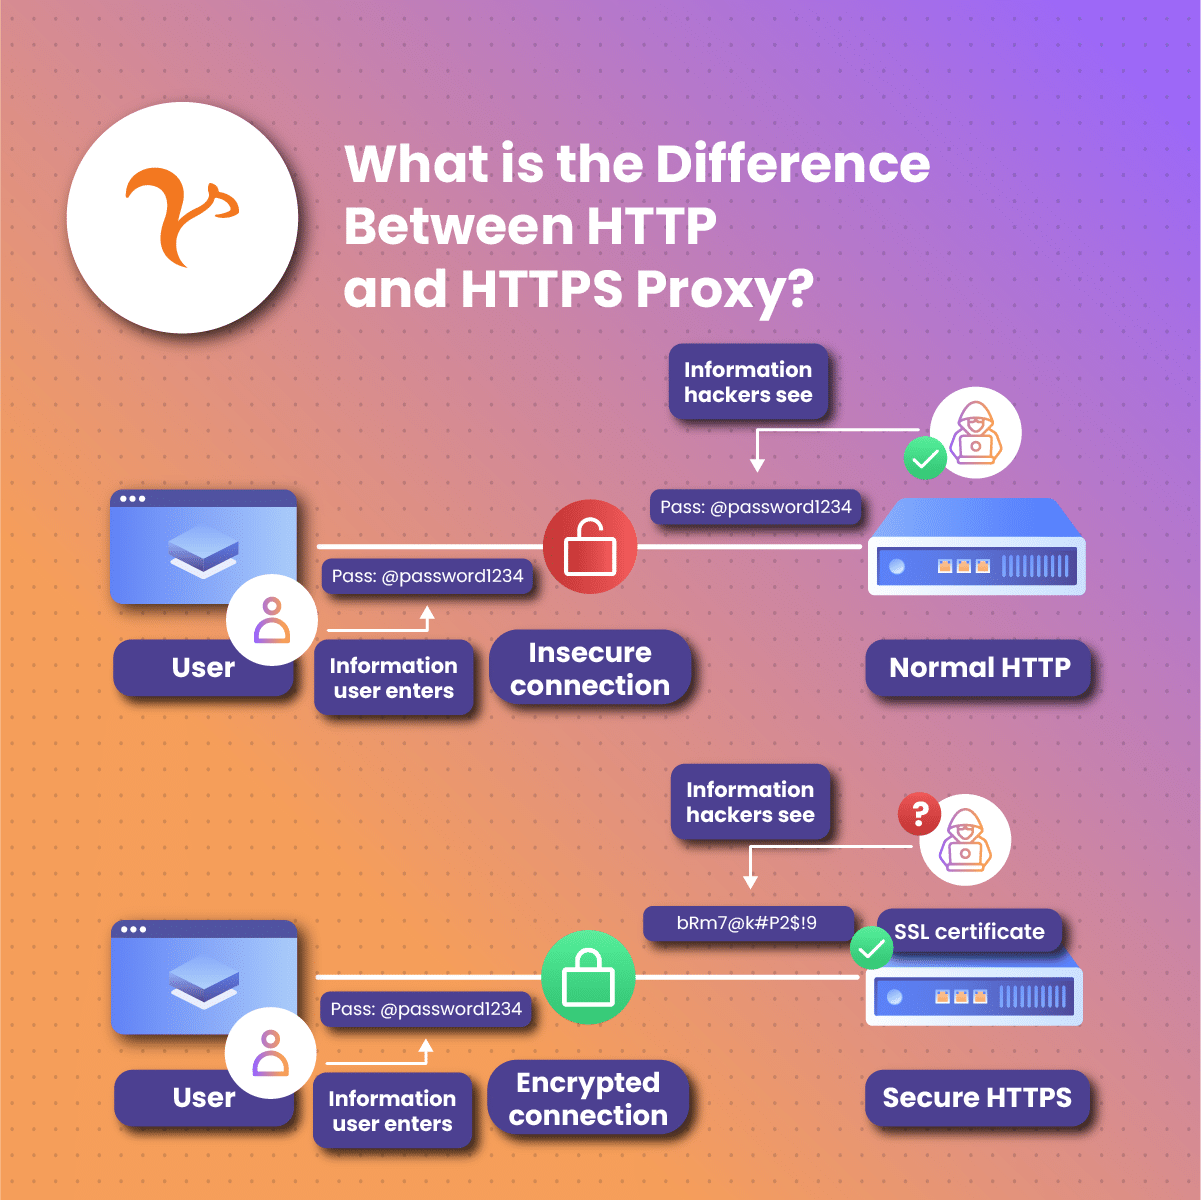 What is the Difference Between HTTP and HTTPS Proxy?